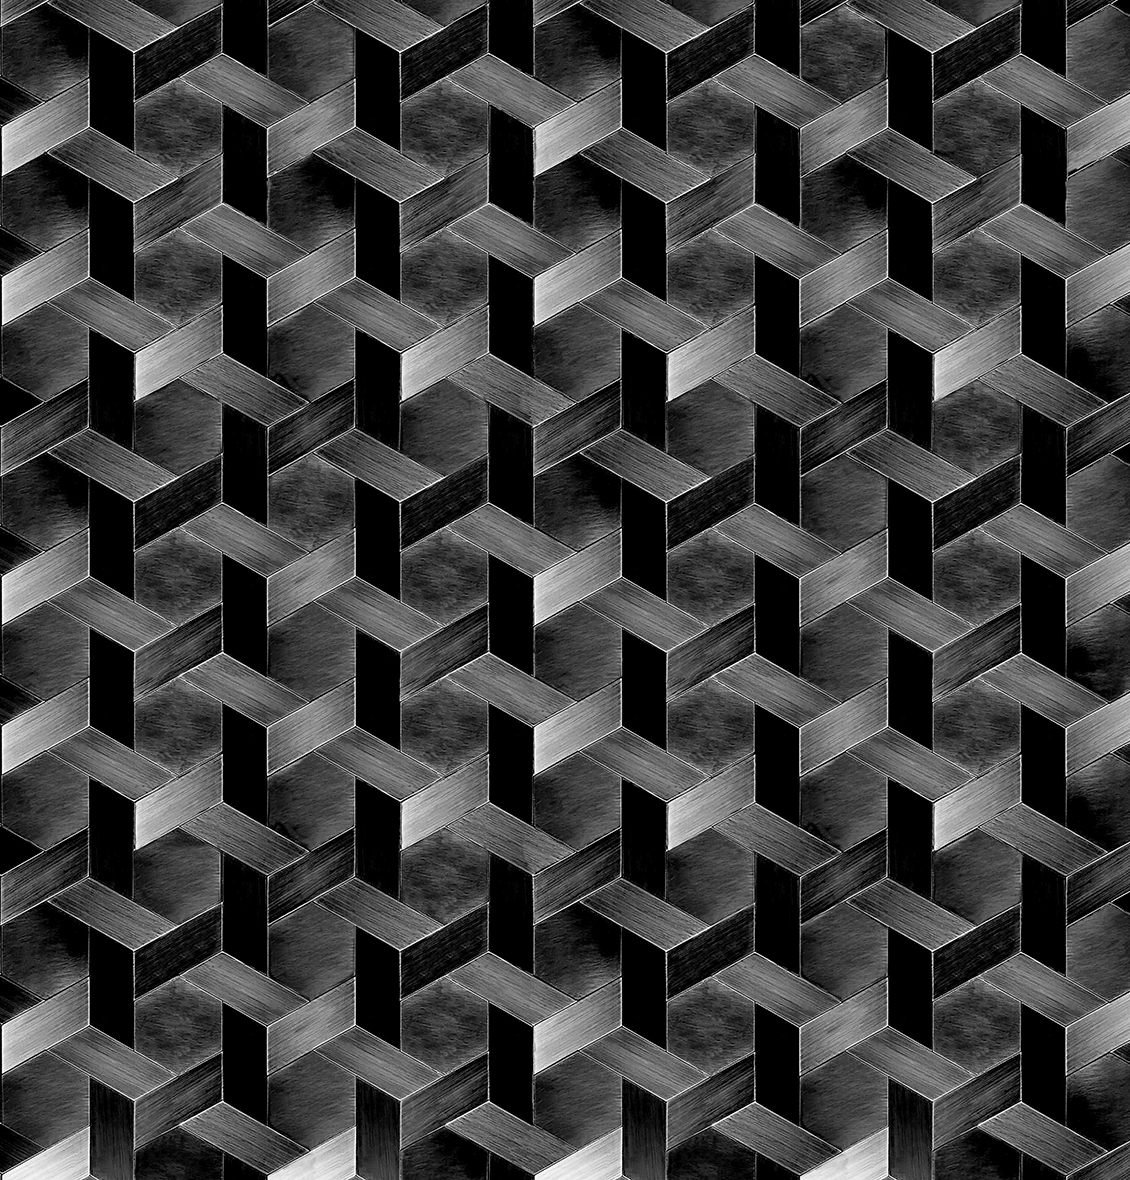 Optical Geometric wallpaper with silver metallic texture, on a black background